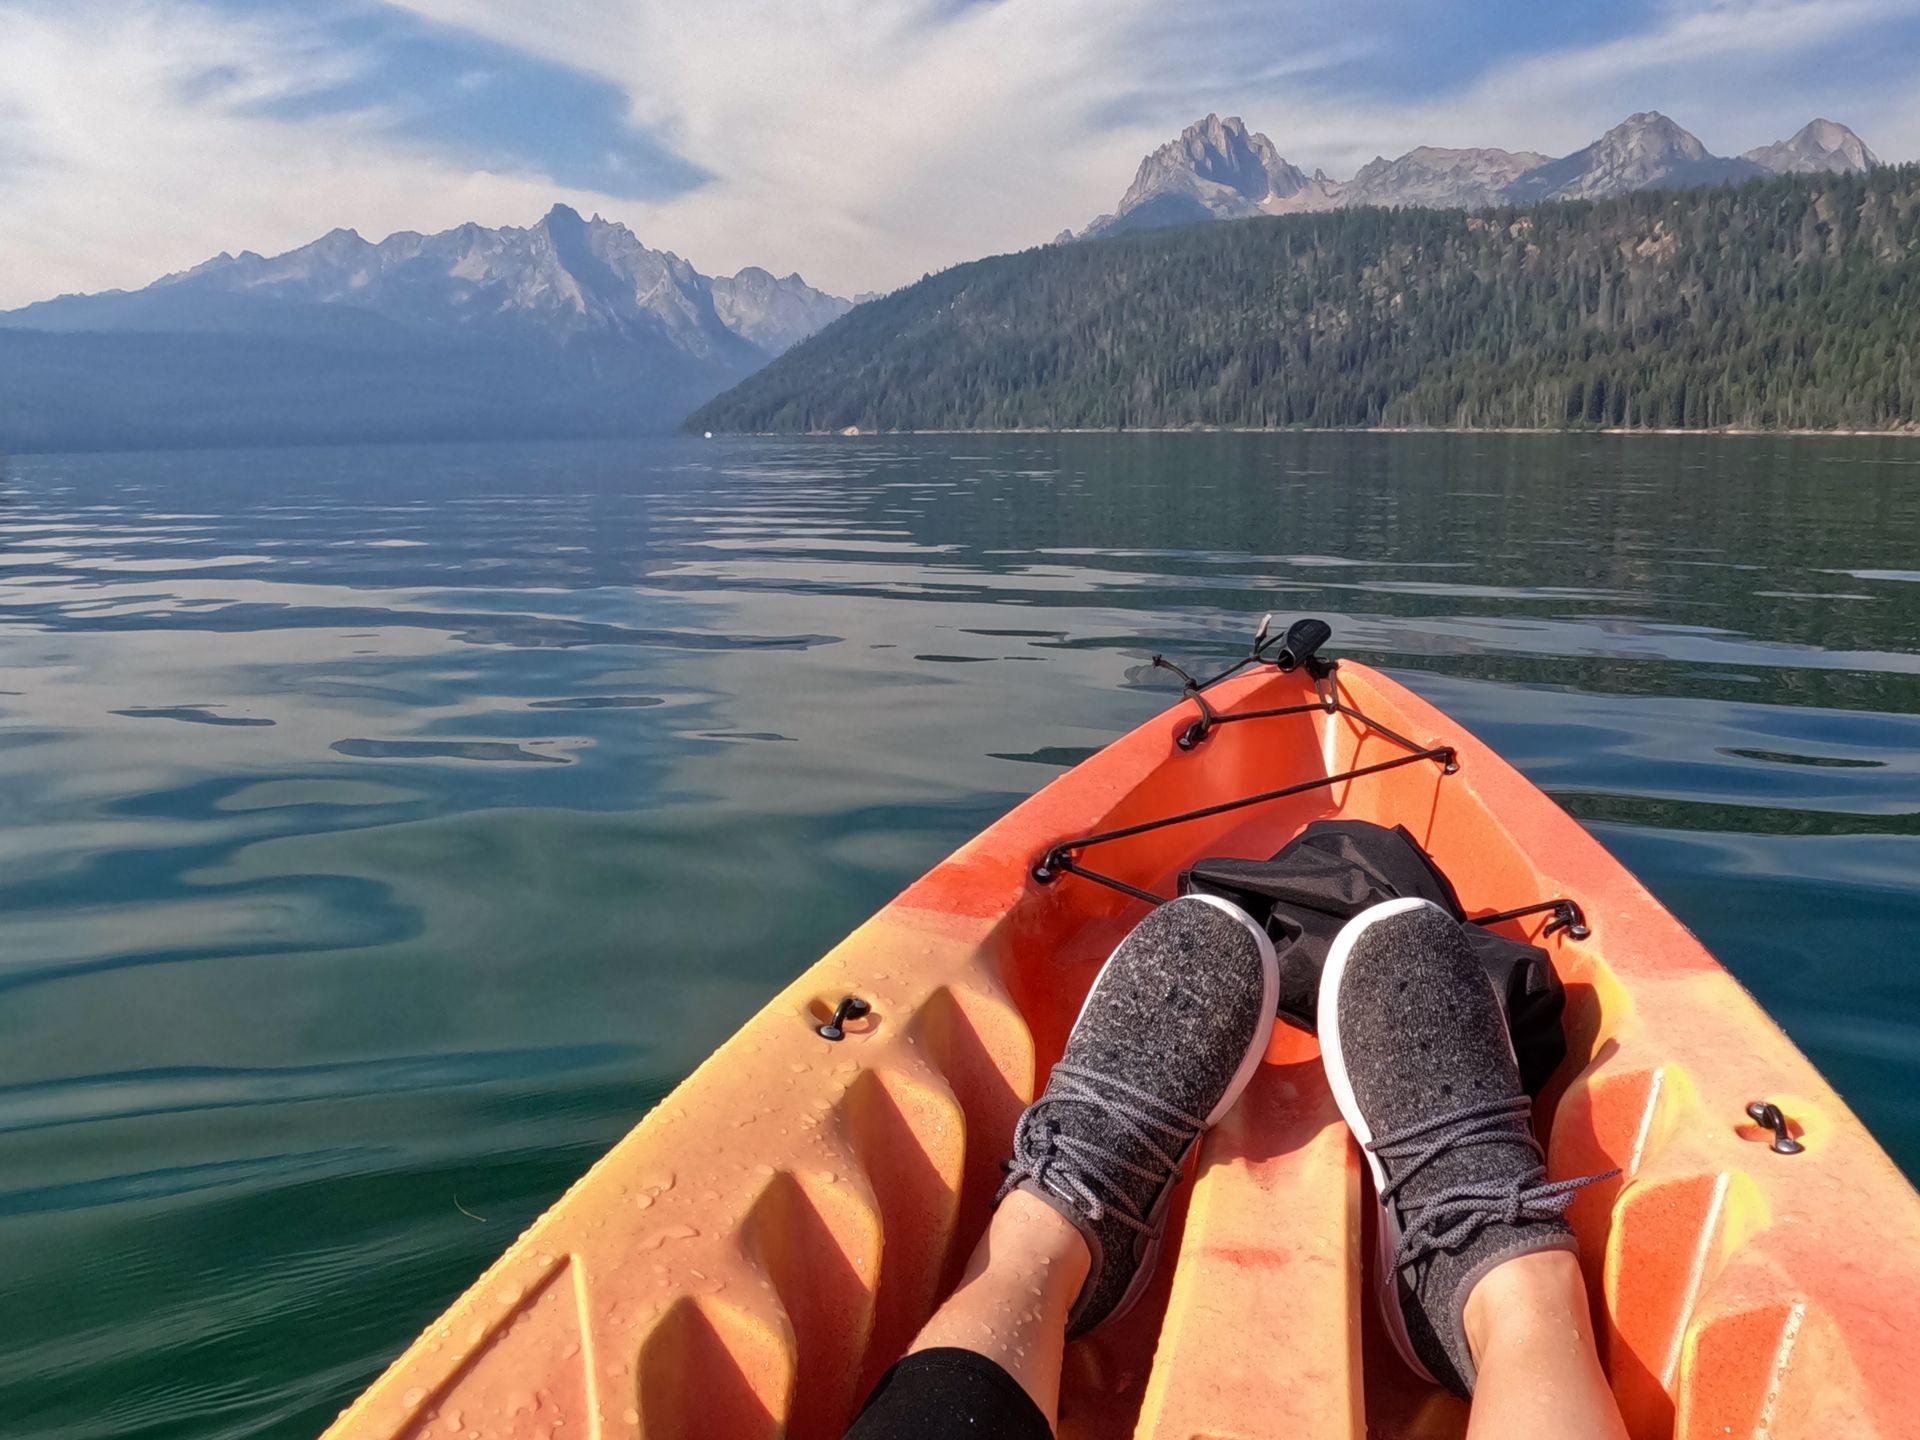 Kayaking on Redfish Lake. The water is surrounded by trees and there are mountains in the distance.